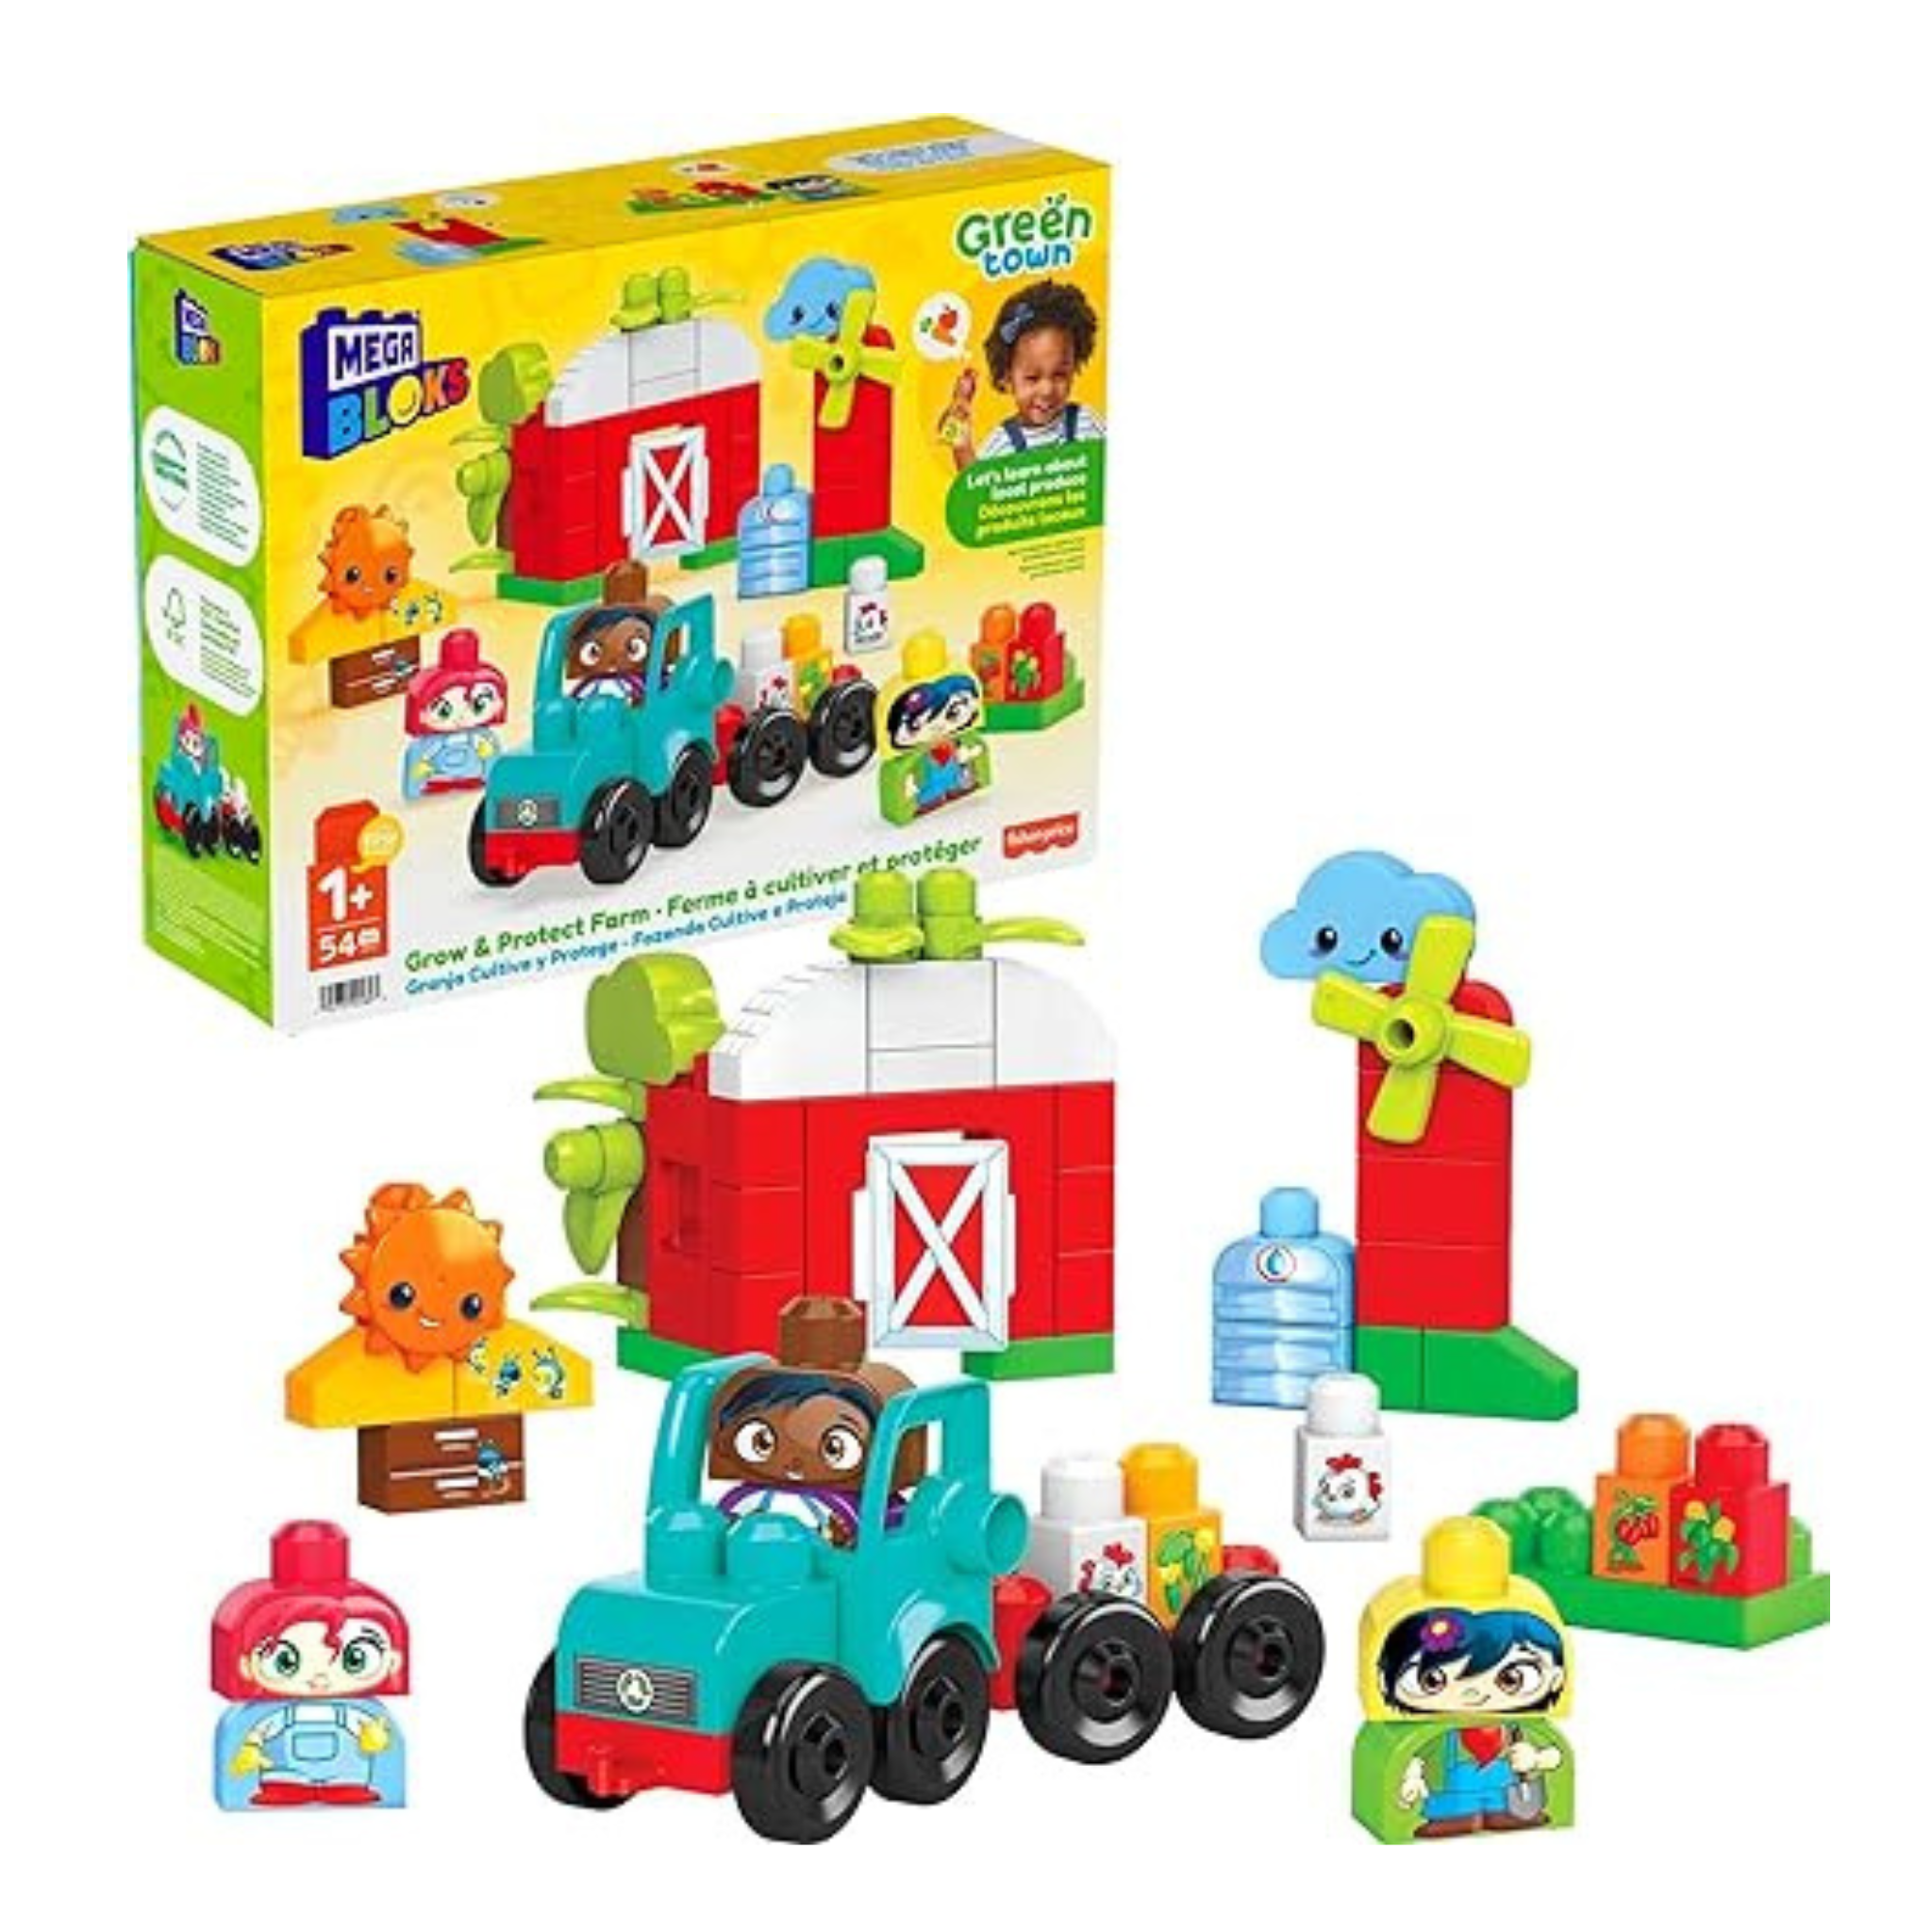 Mega Bloks Fisher-Price Toddler Building Blocks, Green Town Sort & Recycle Squad with 51 Pieces